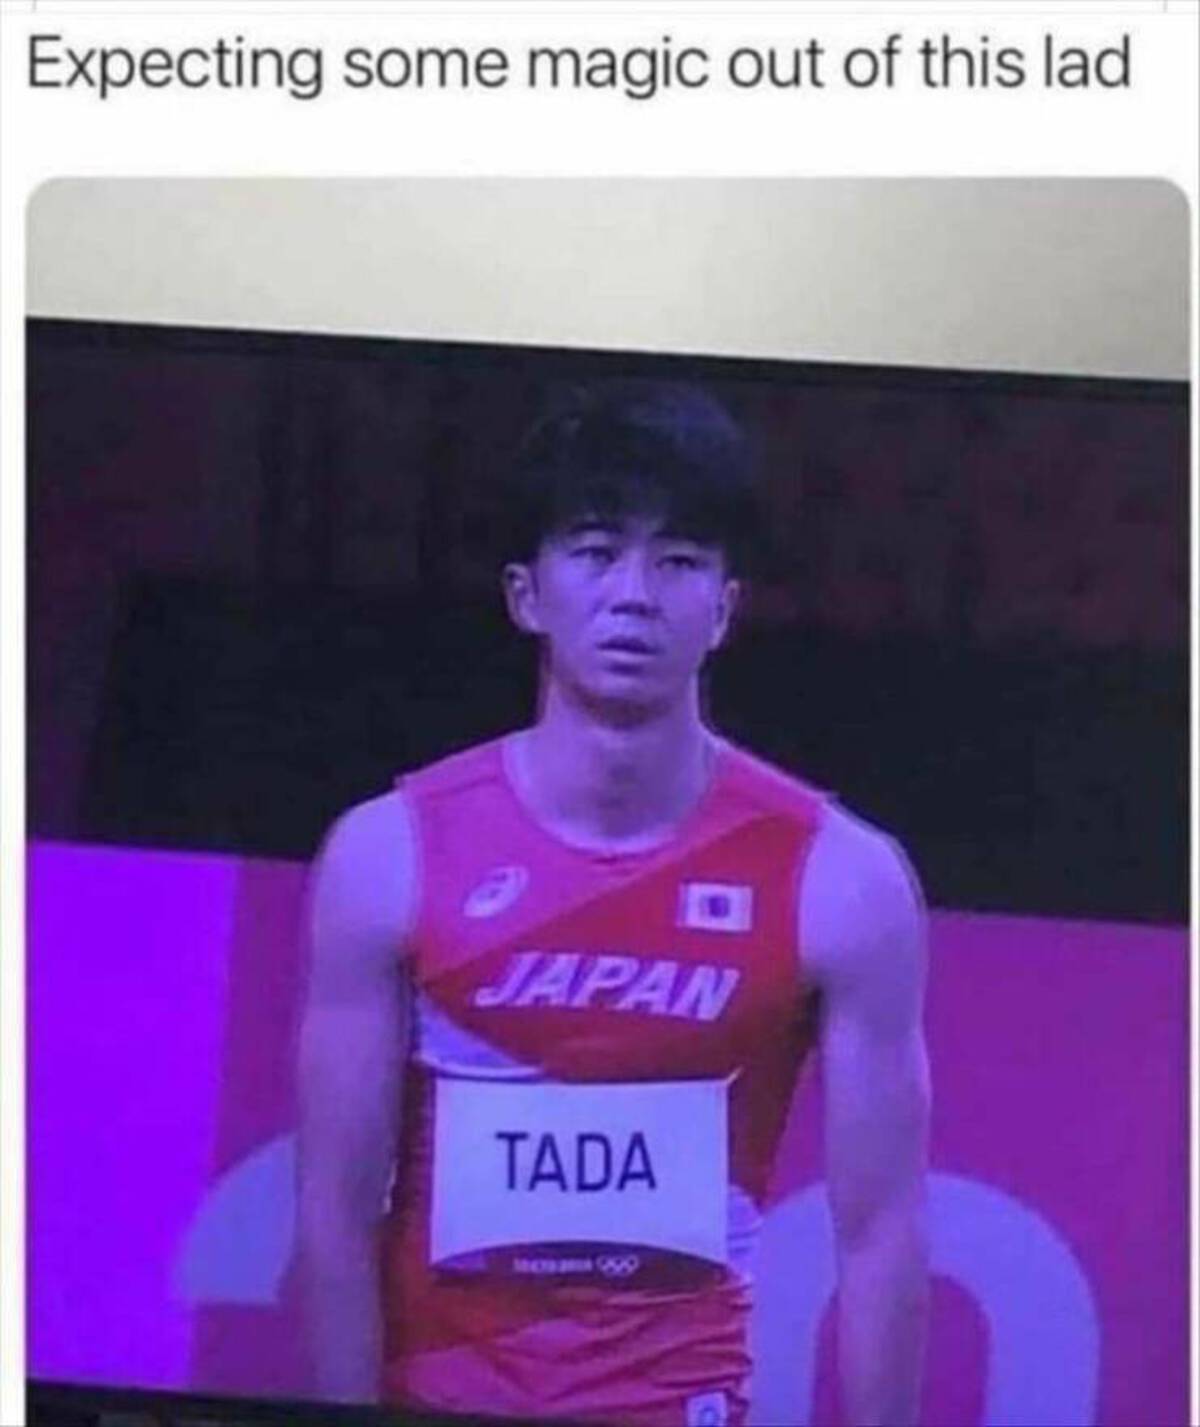 tada meme olympics - Expecting some magic out of this lad Japan Tada